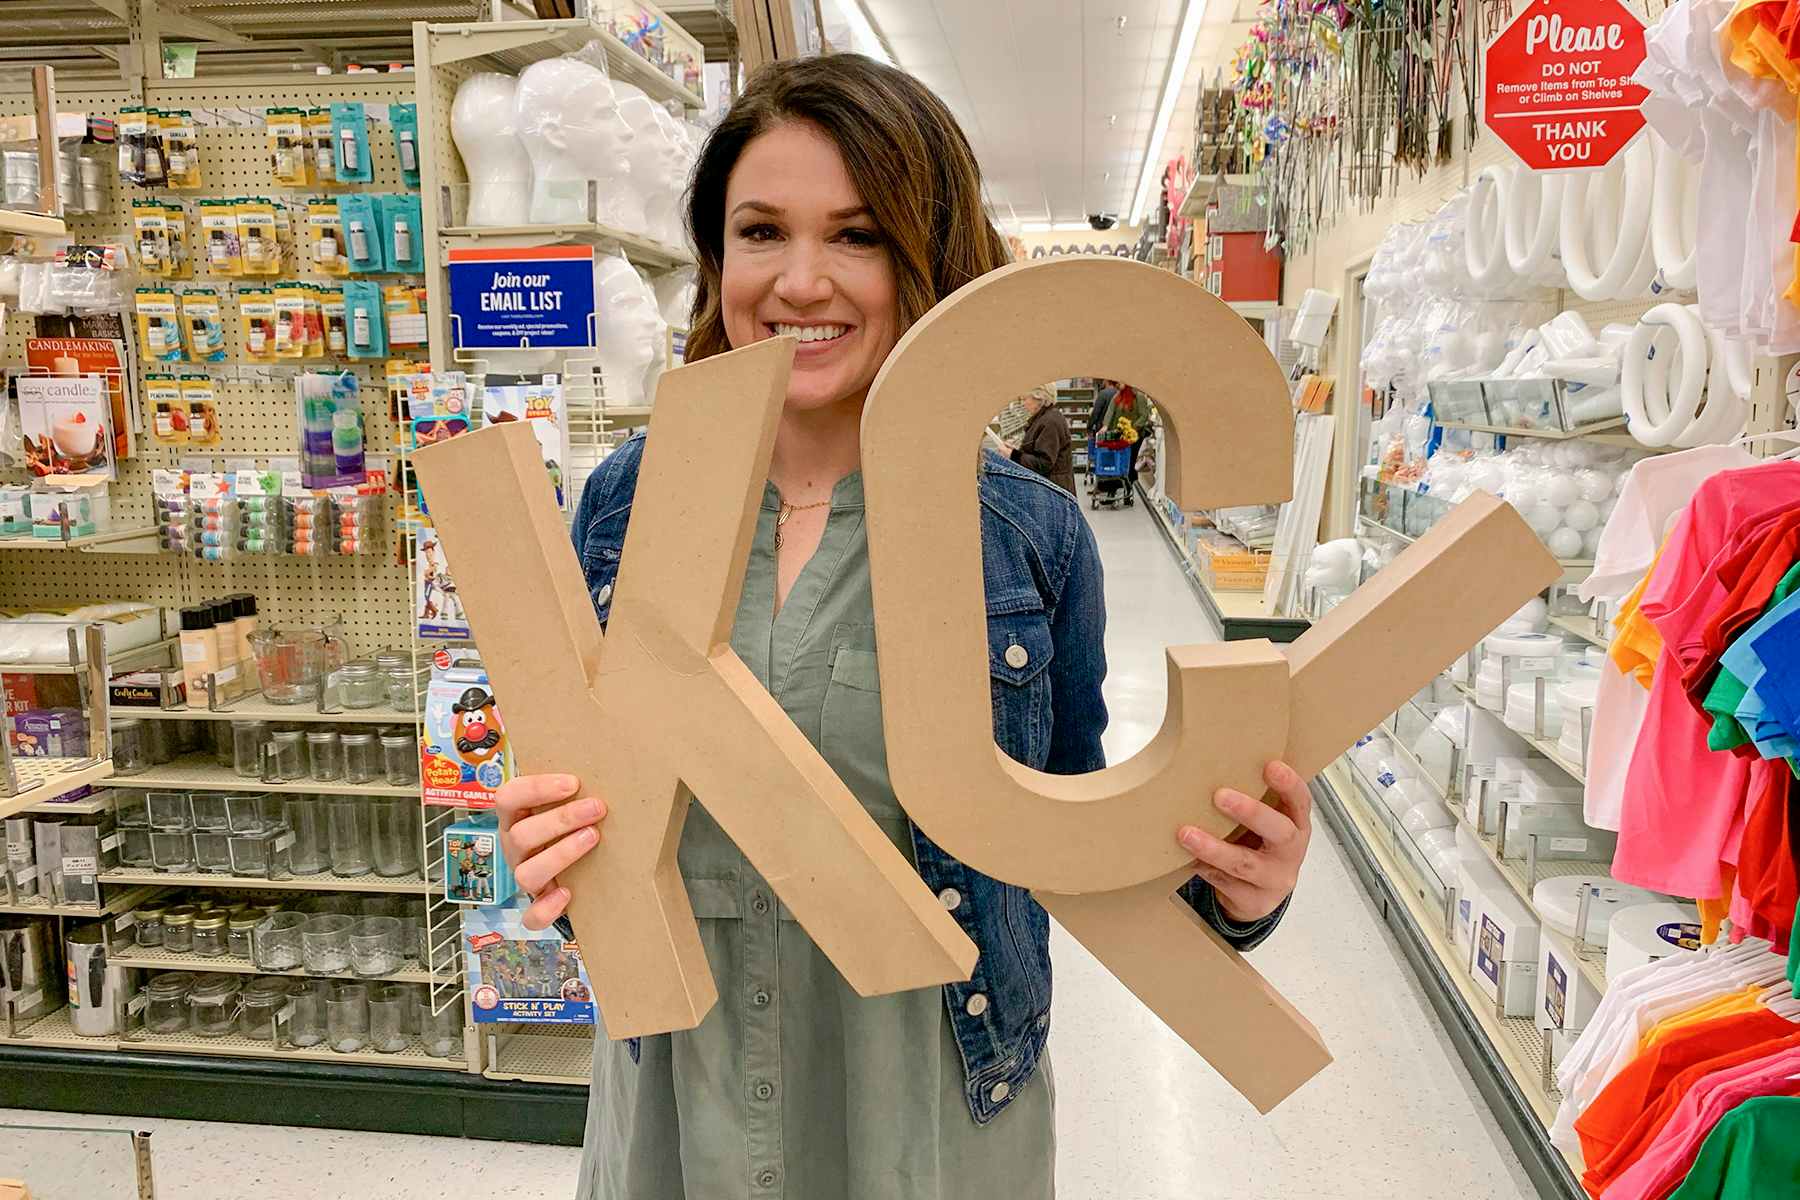 One of the owners of thekrazycouponlady.com, holding up large cardboard letters that read "KCL".